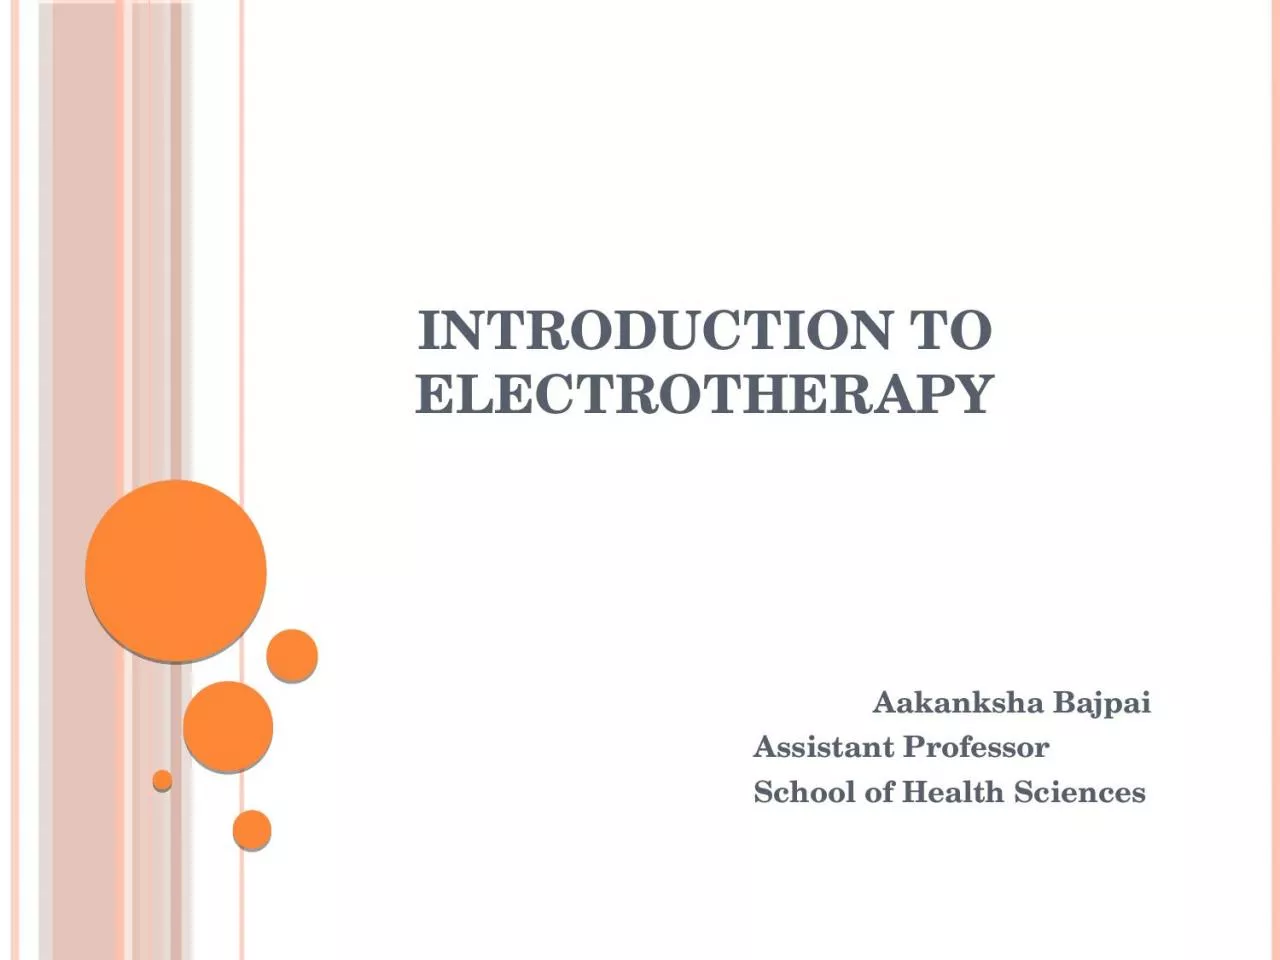 Introduction to electrotherapy